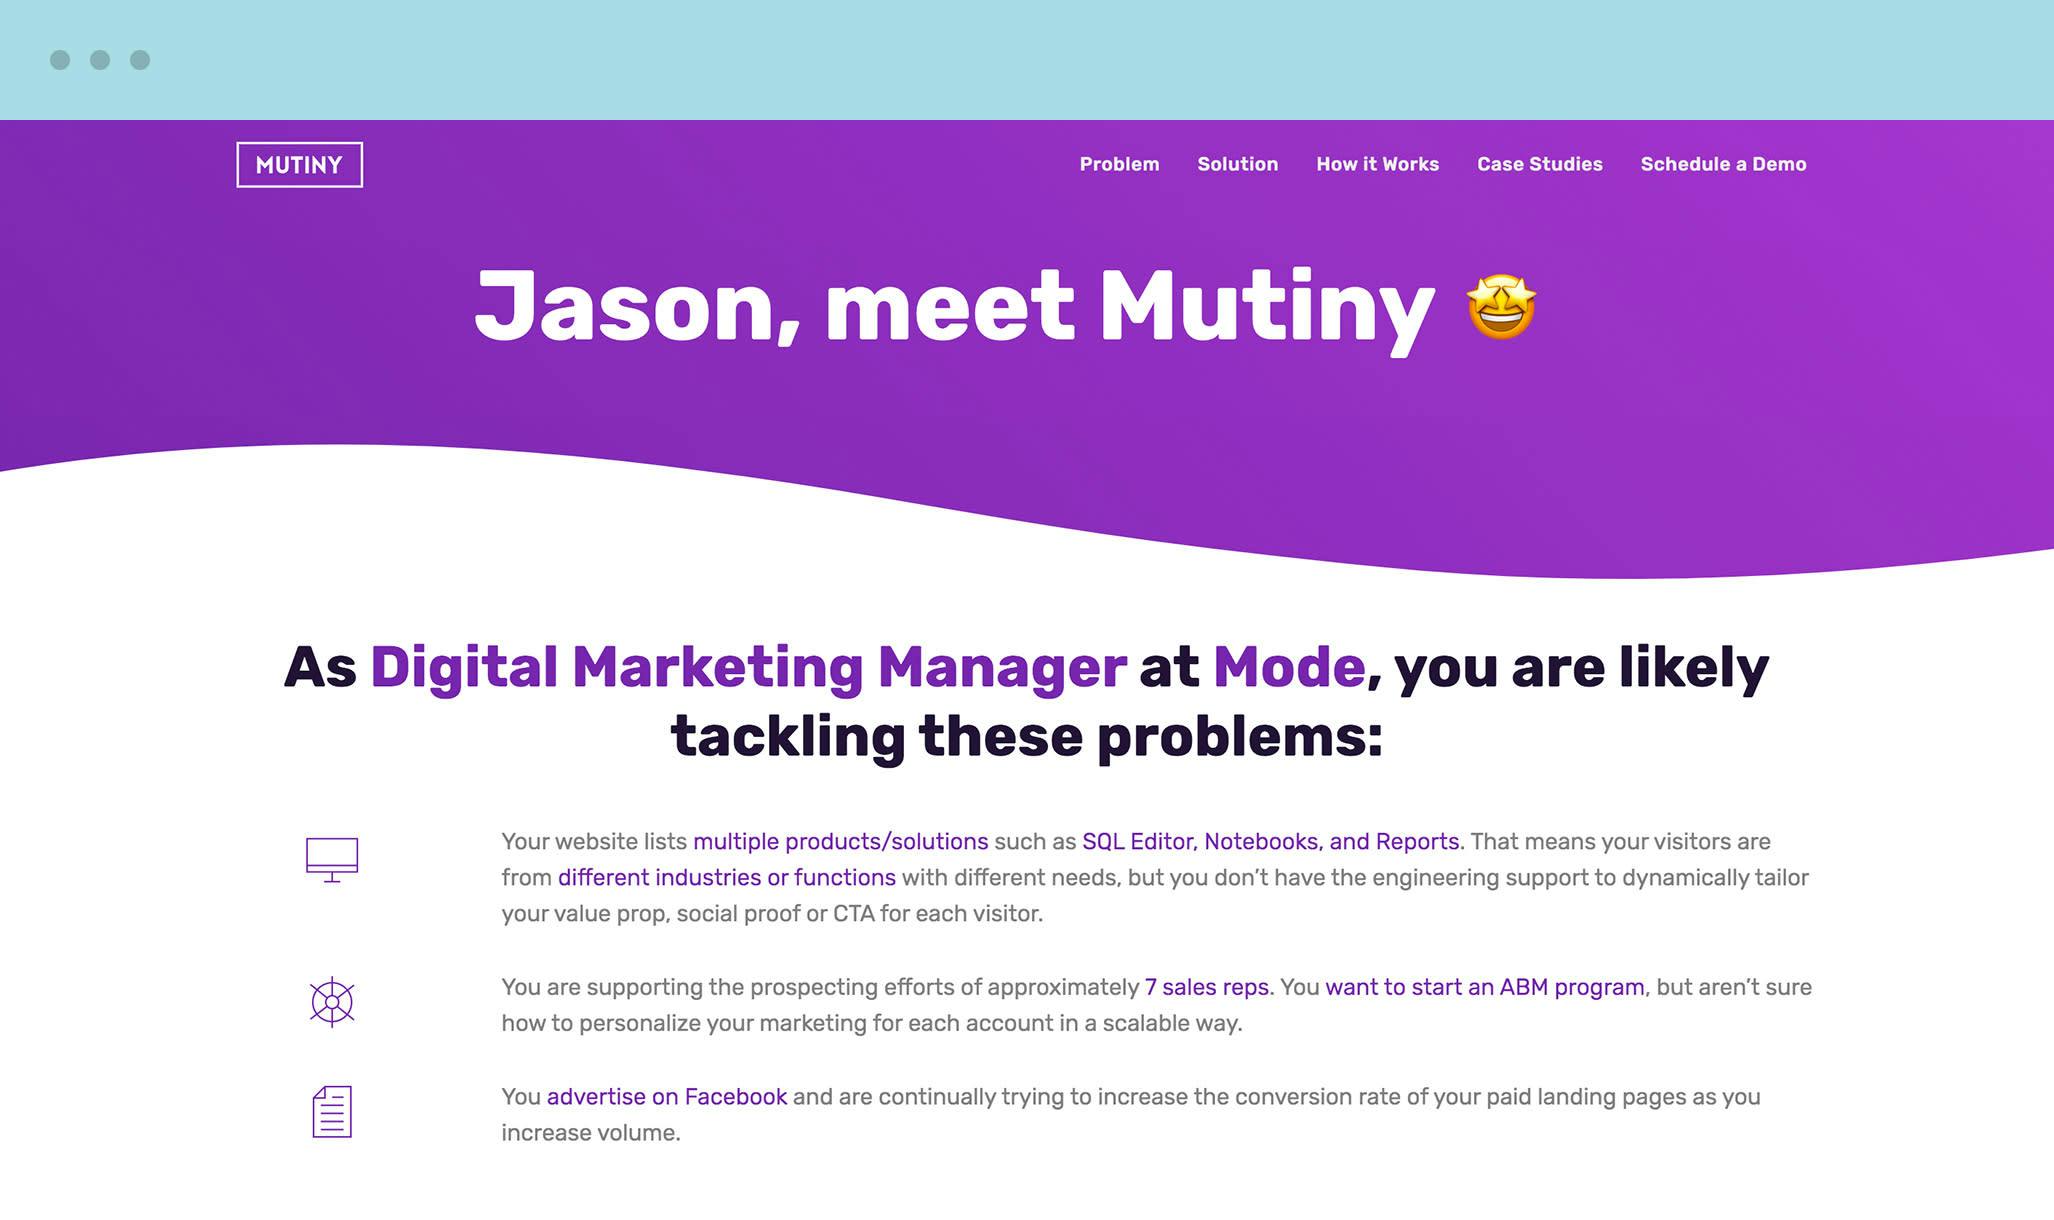 Mutiny's ABM page for Jason